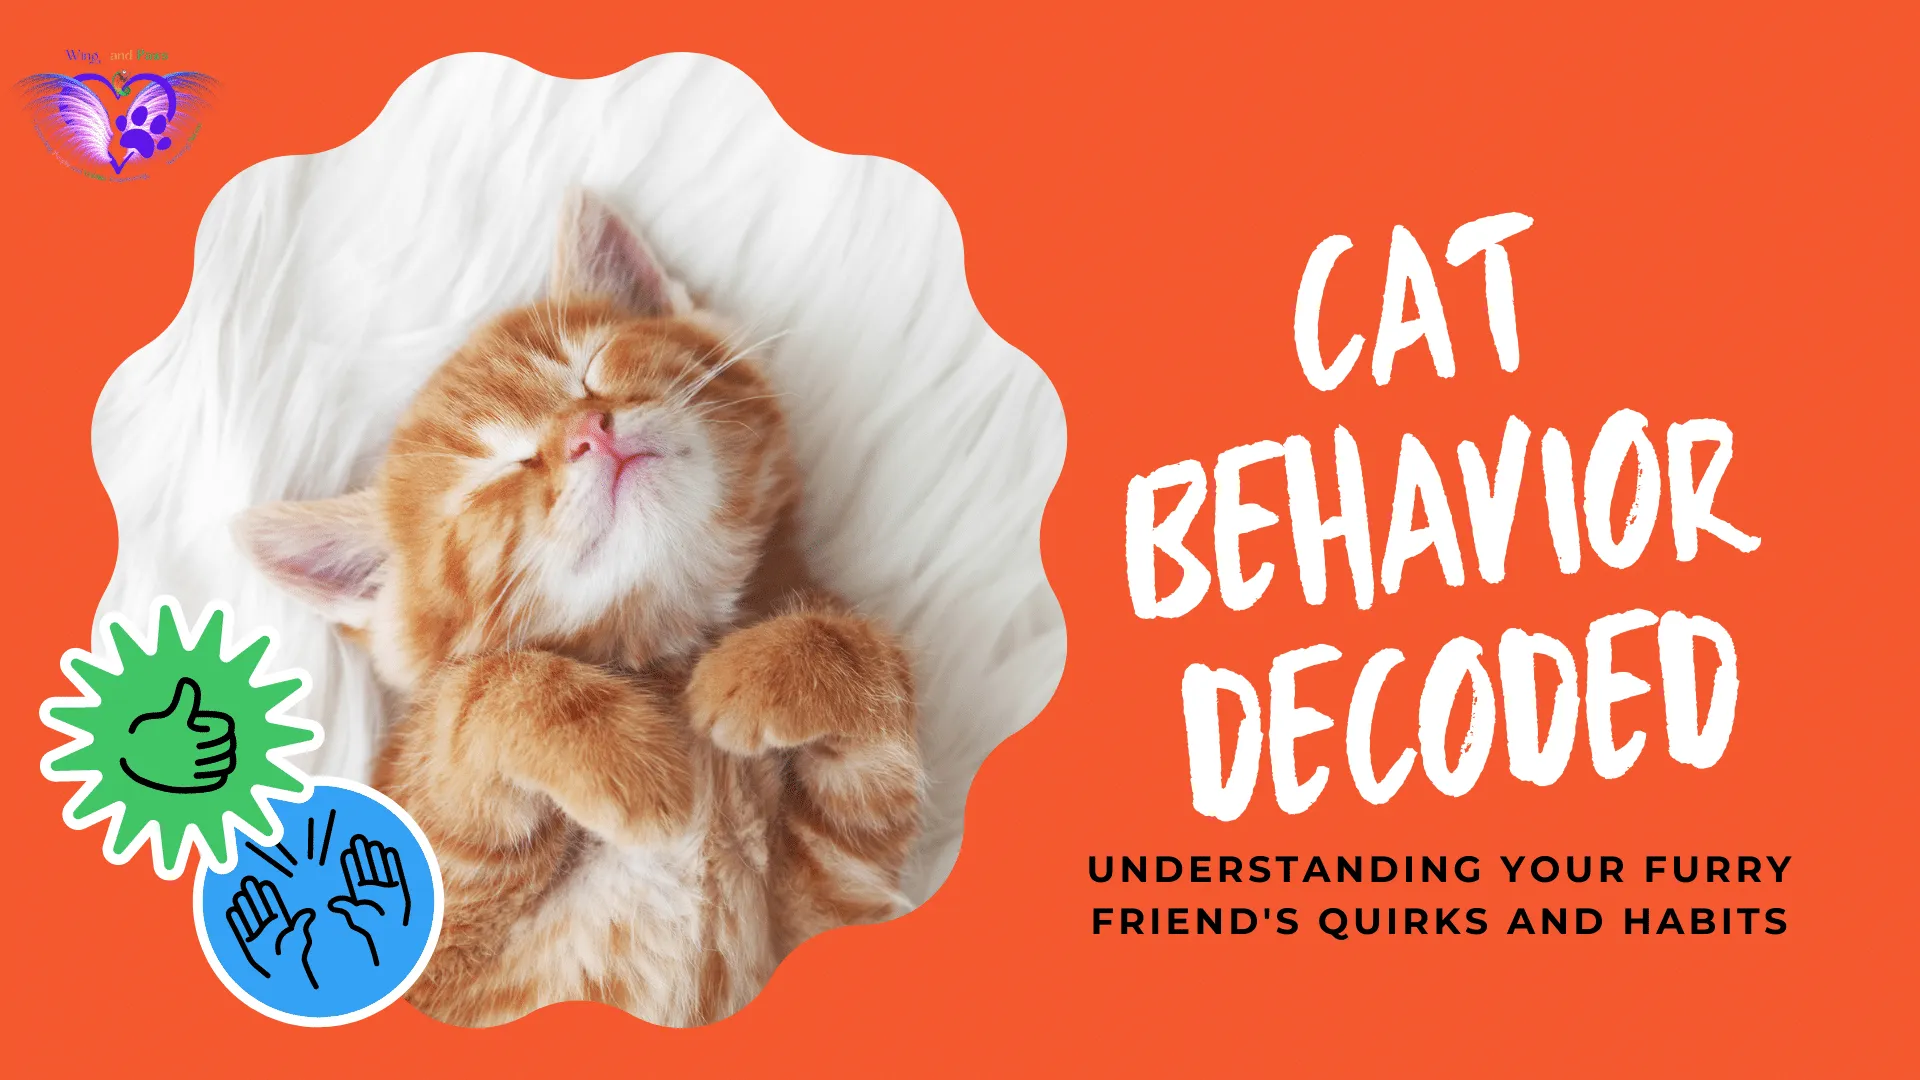 Cat Behavior Decoded: Understanding Your Furry Friend's Quirks and Habits